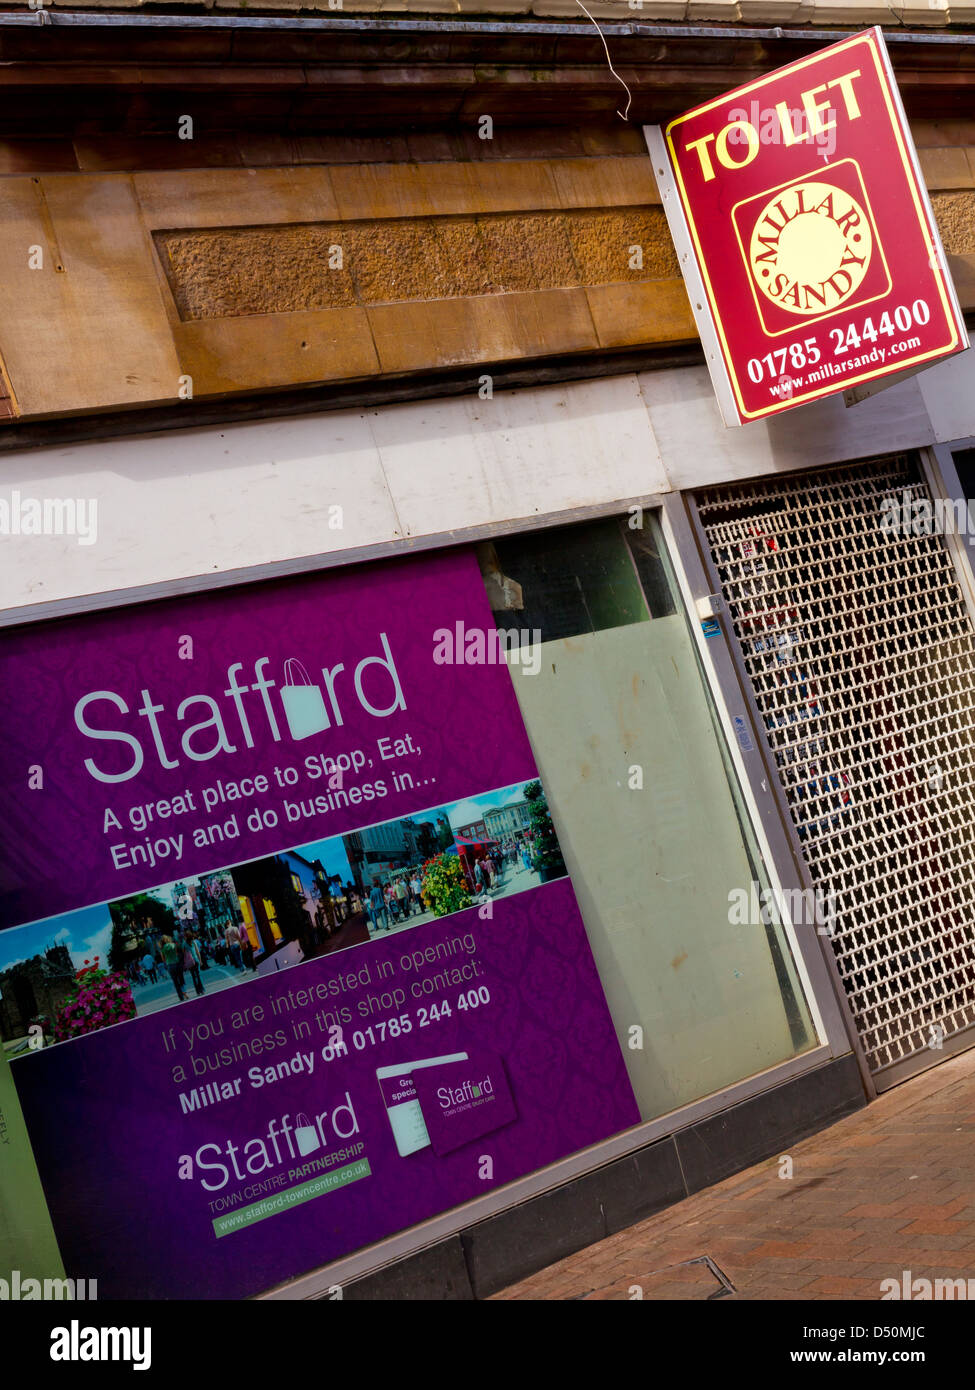 Closed high street shop with To Let sign in Stafford town centre Staffordshire England UK during 2013 economic downturn Stock Photo